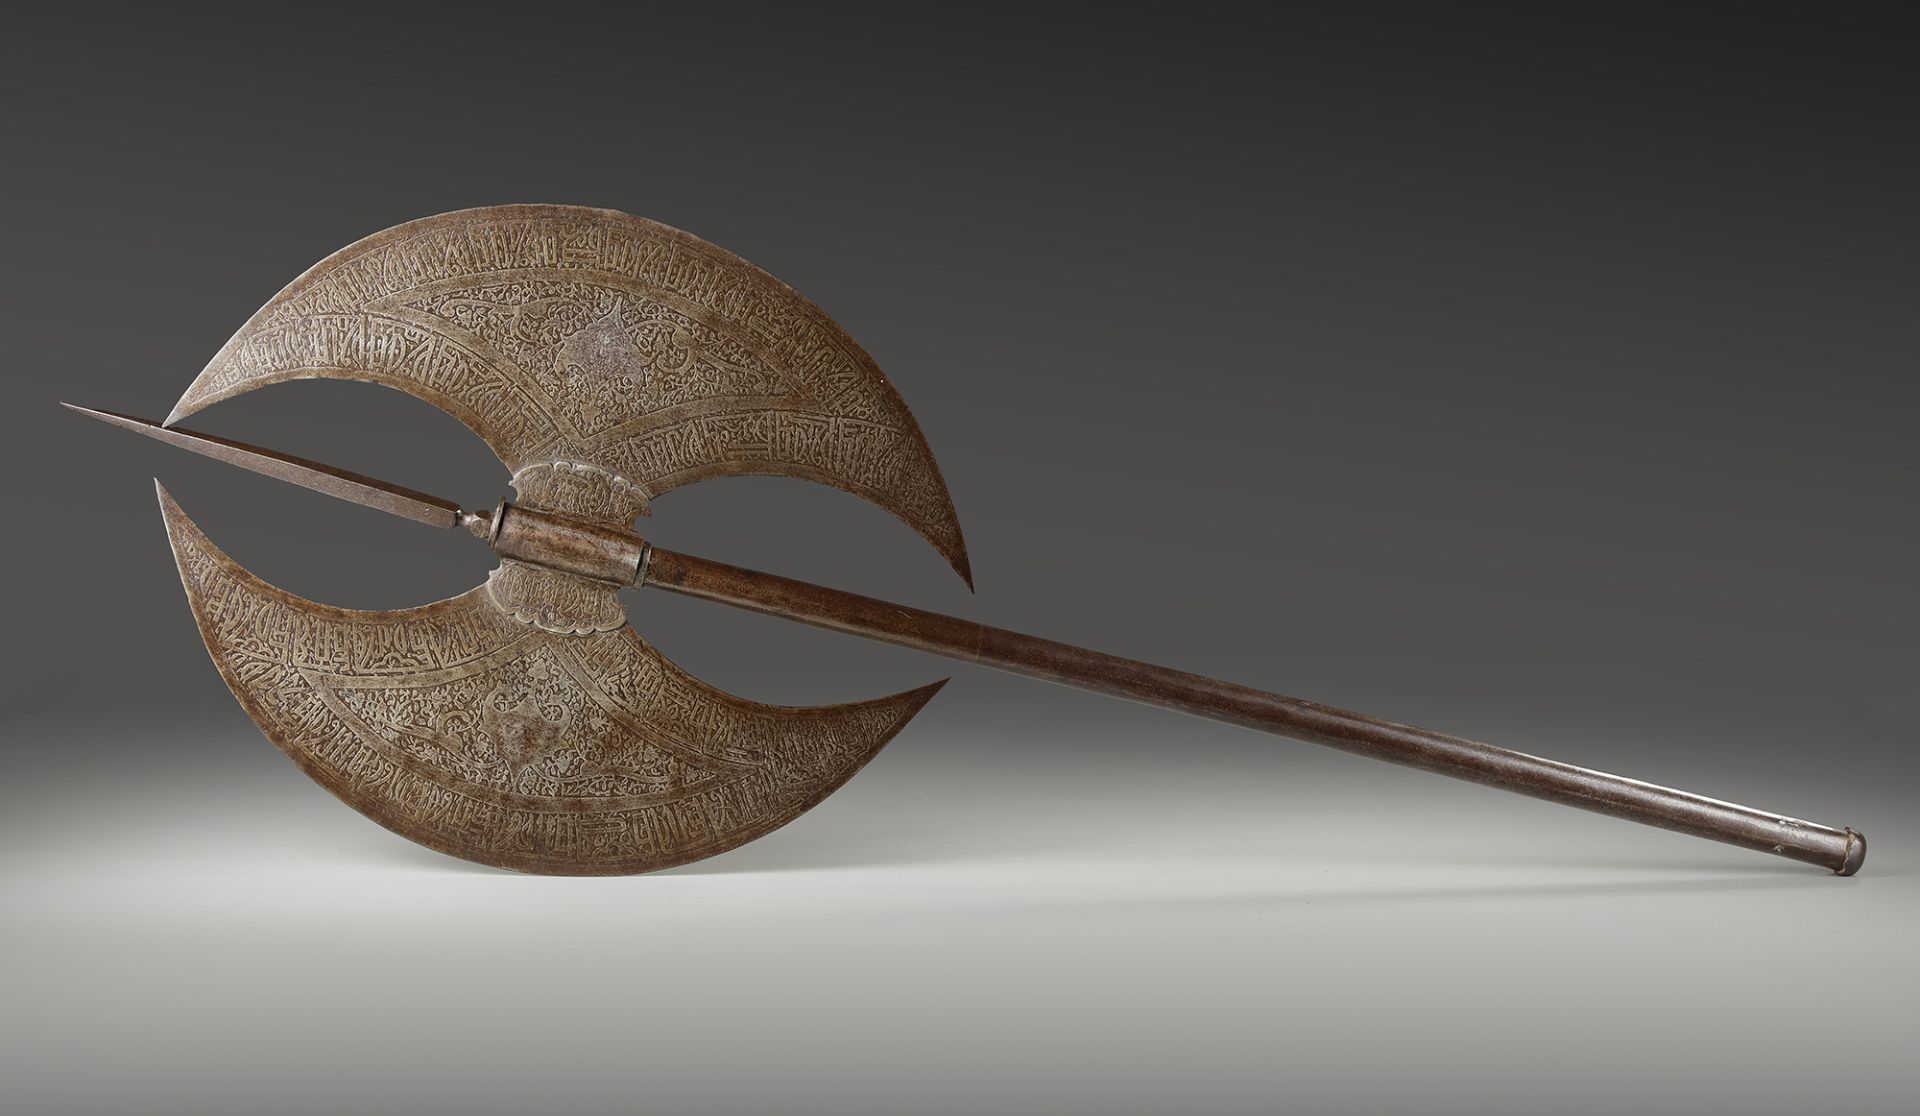 A LARGE QAJAR DOUBLE HEAD AXE, PERSIA, 19TH CENTURY